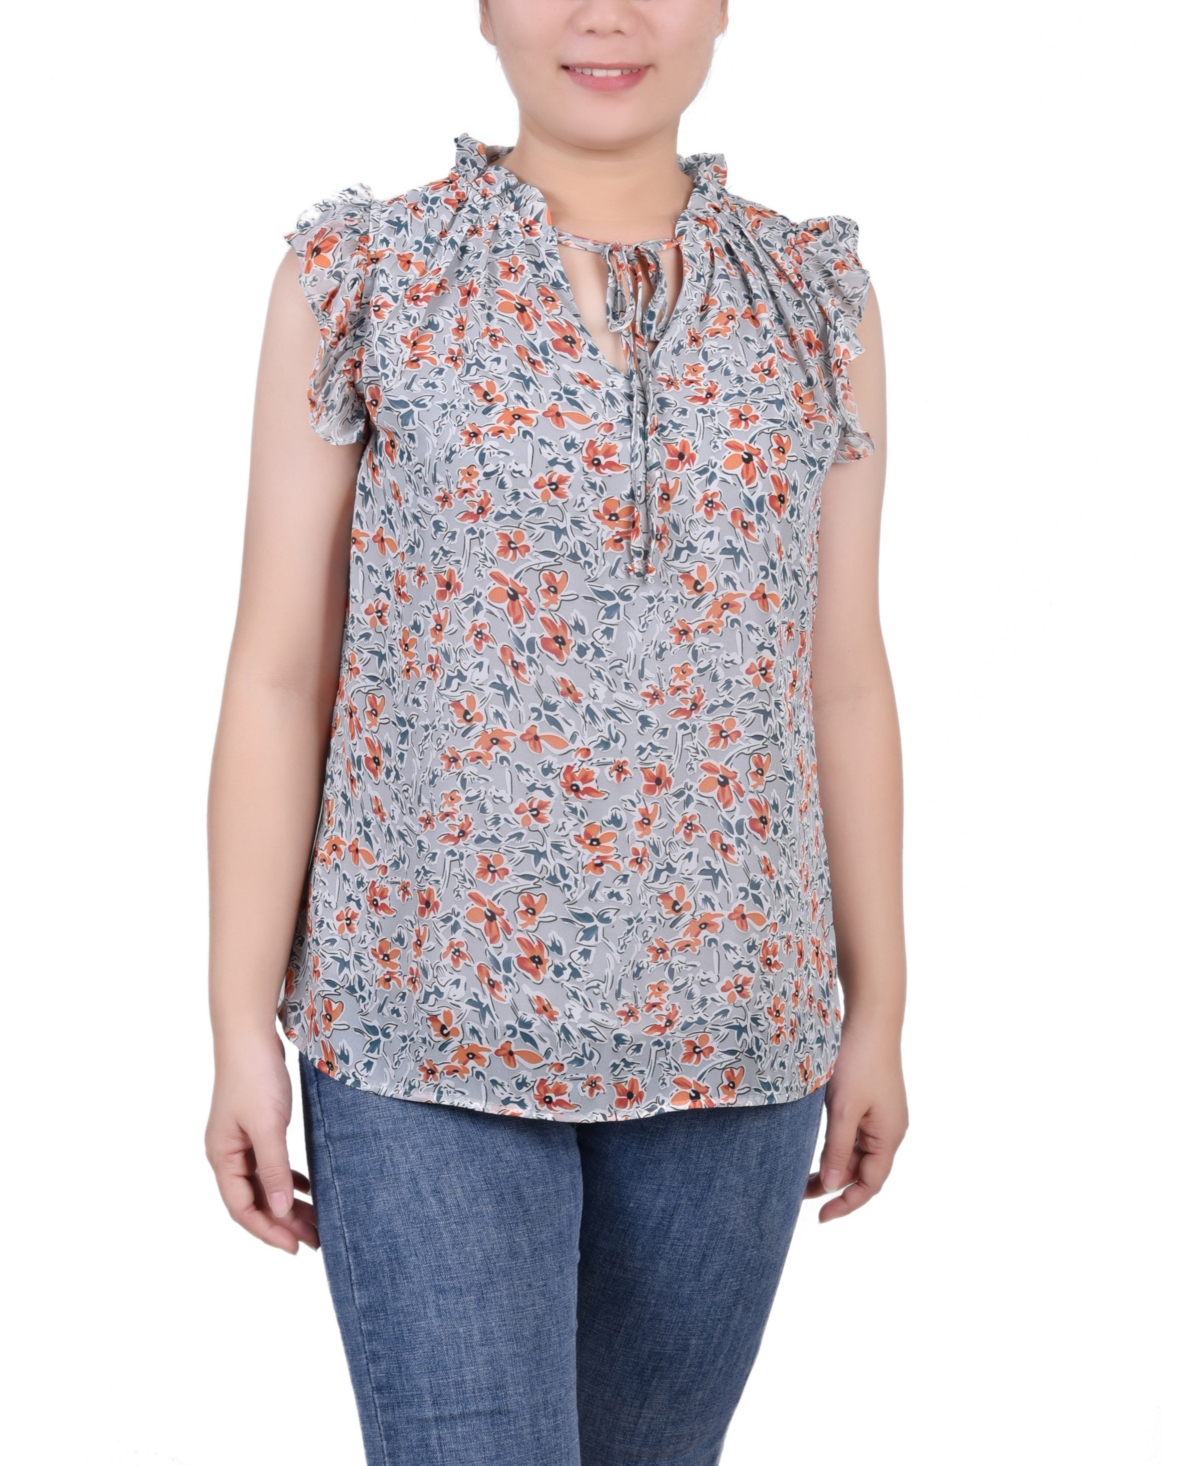 Ny Collection Petite Size Ruffled Sleeve Blouse With Tie Closure Top In Blue Green Orange Floral